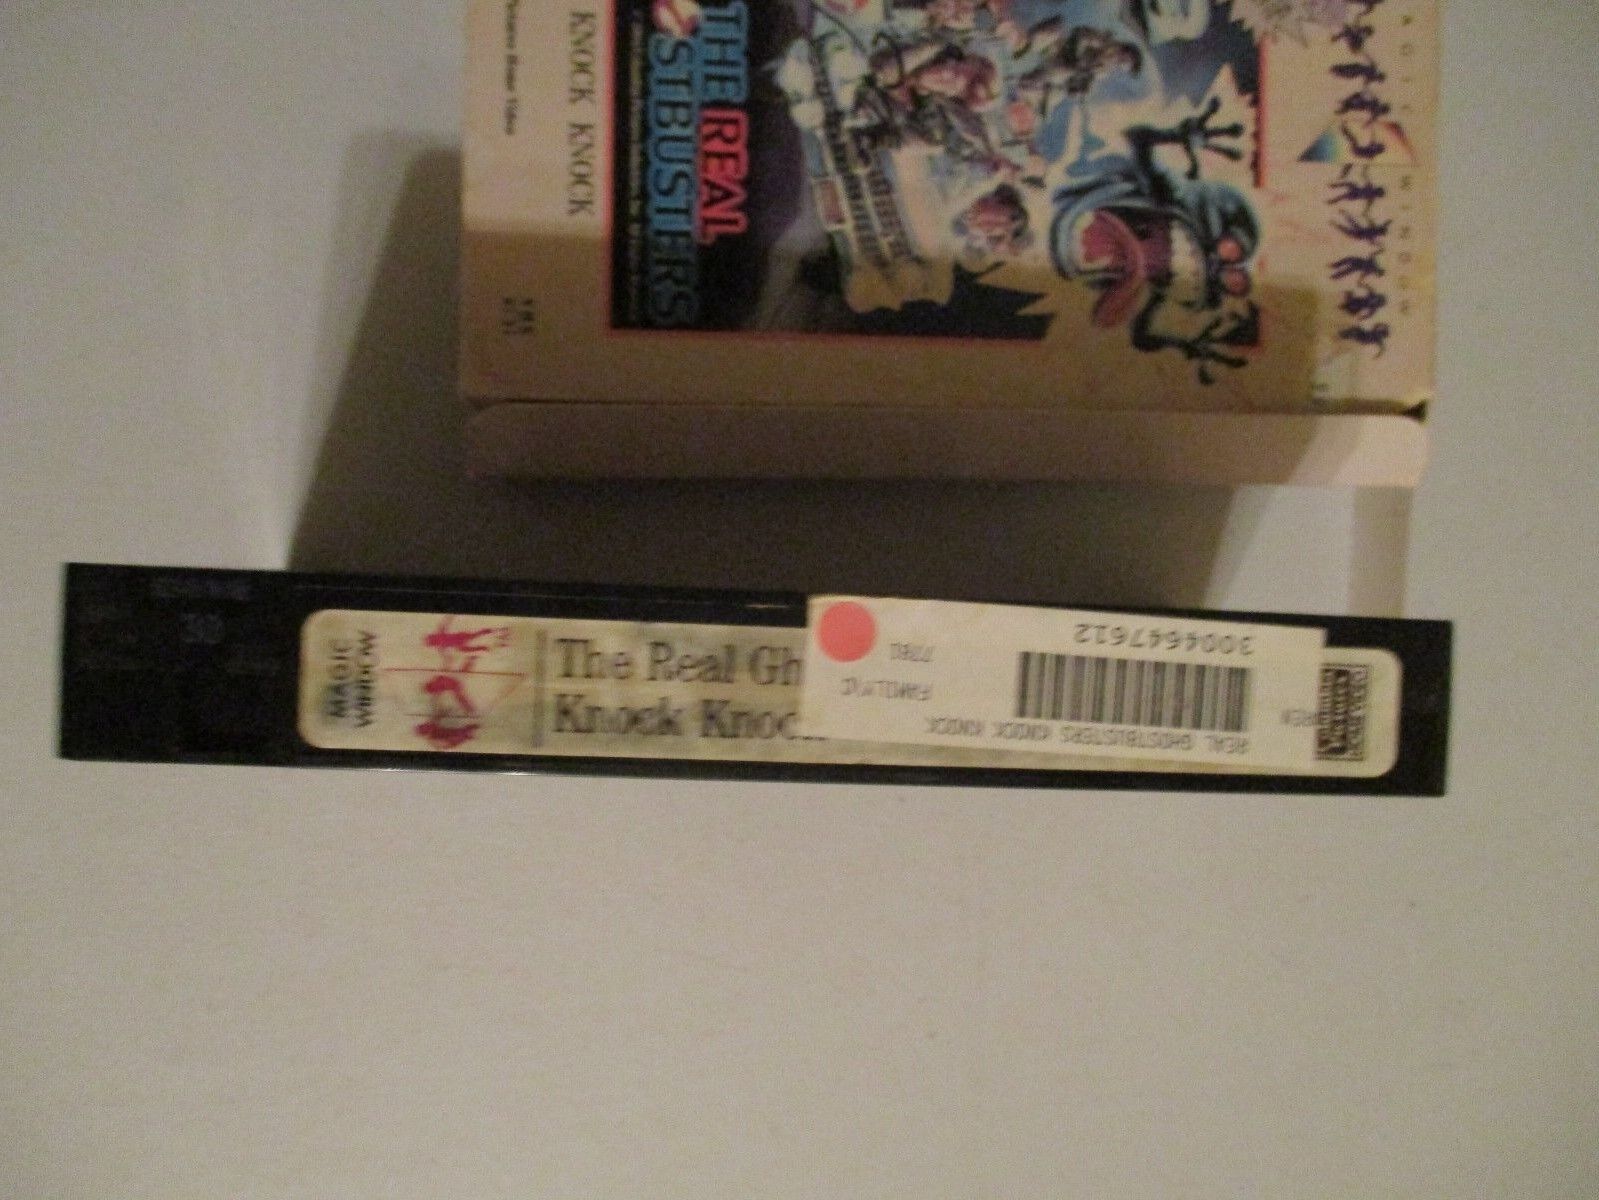 THE REAL GOHSTBUSTERS ANIMATED VHS TAPE 